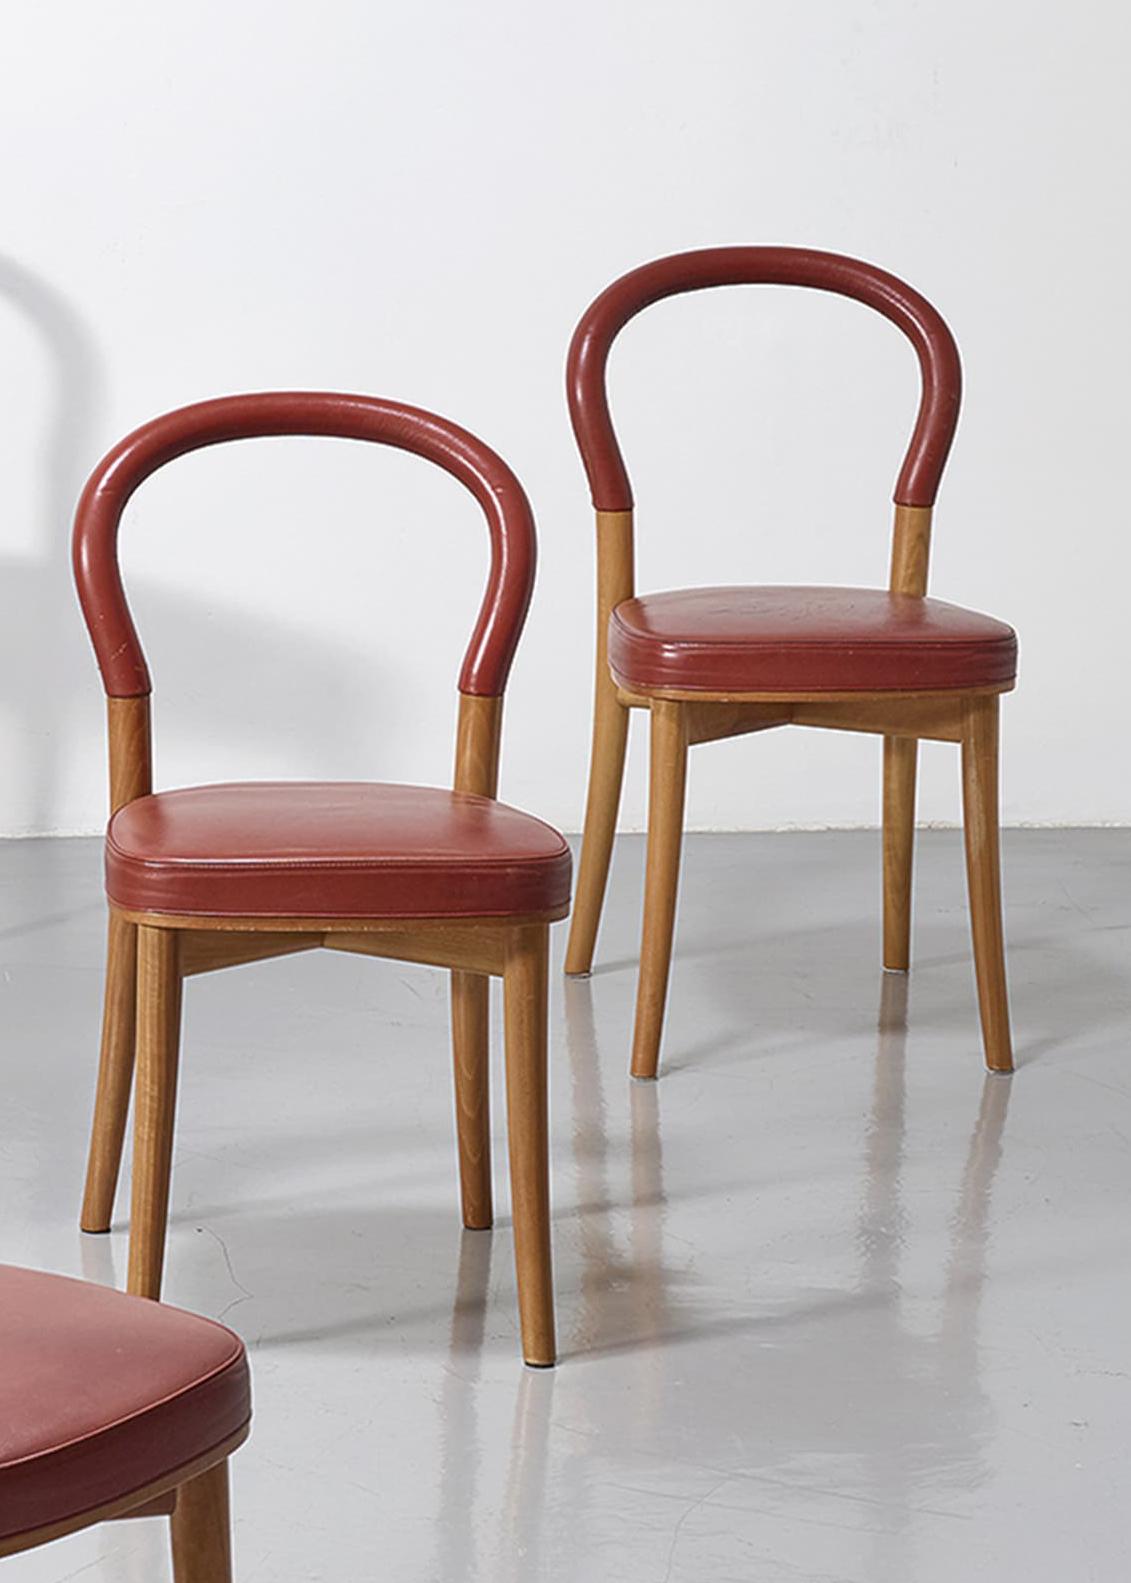 A set of six Model 501 Göteborg I dining chairs designed by Gunnar Asplund in 1983 for Cassina, Italy. The chairs are in vintage condition with some were from previous owners to the leather upholstery. The walnut frame and legs are stamped with the